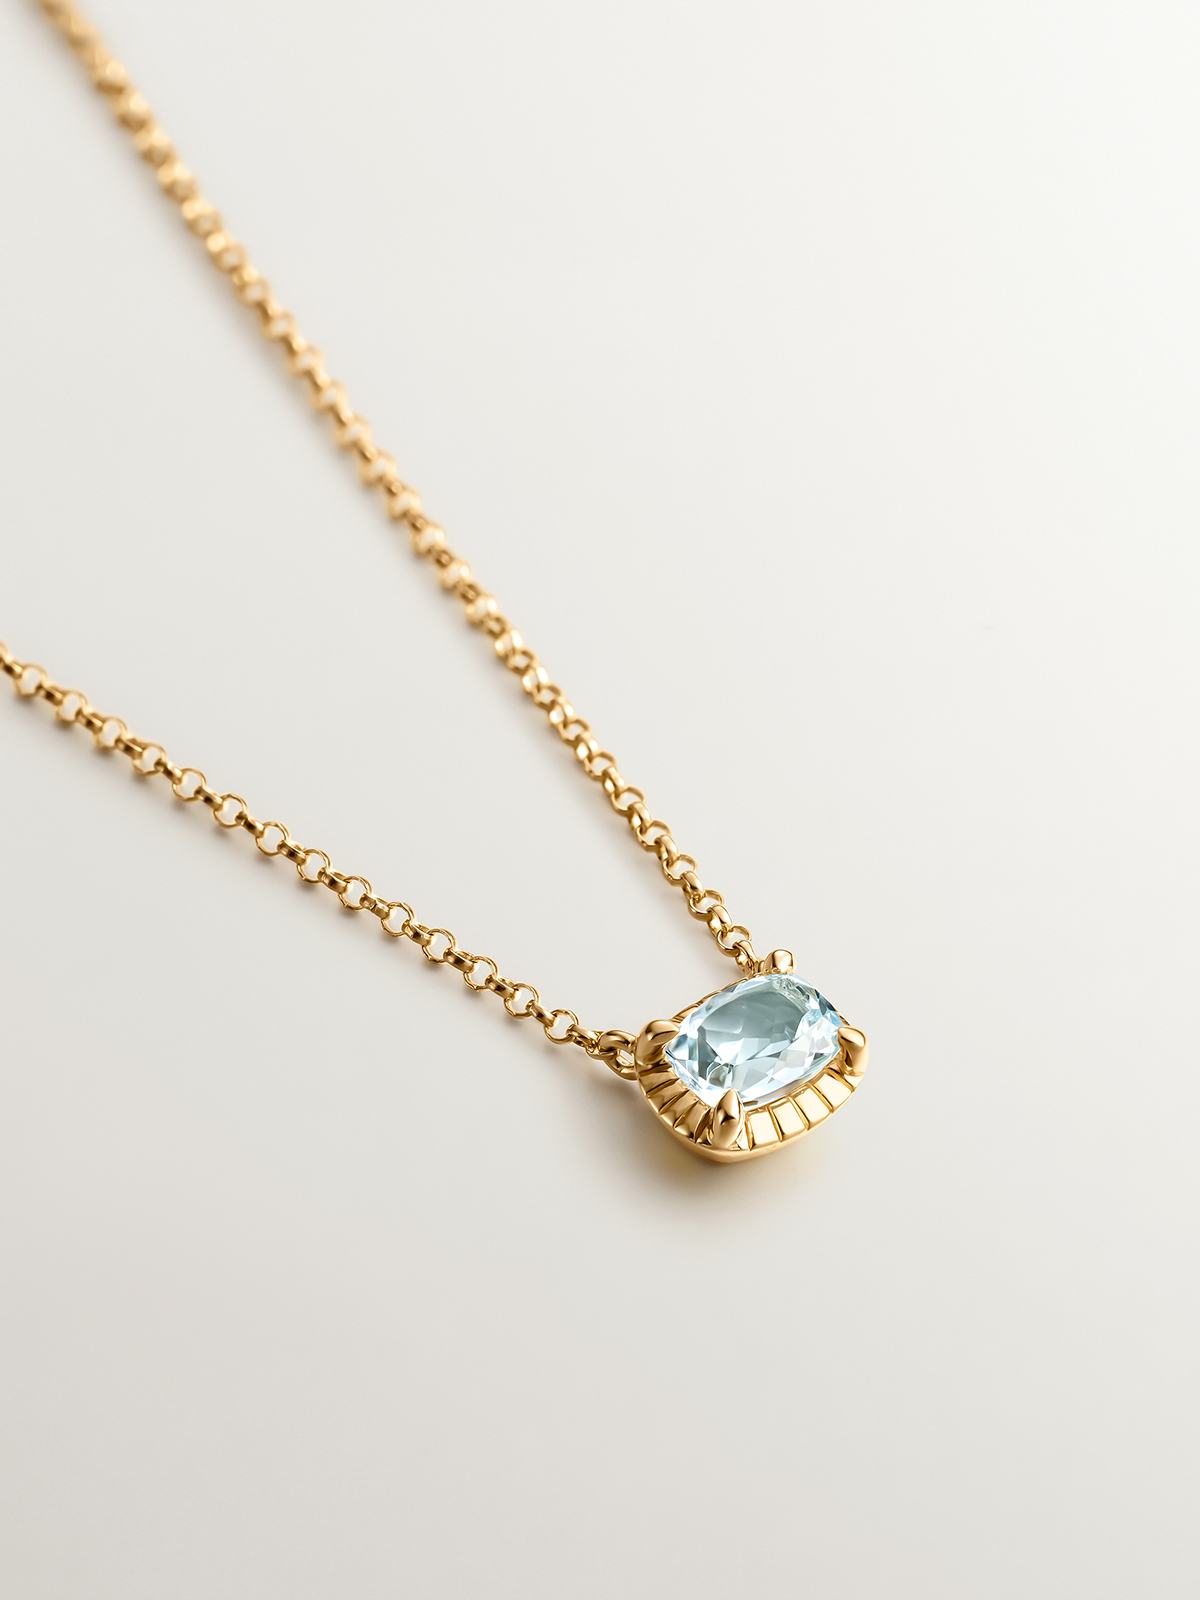 925 Silver pendant bathed in 18K yellow gold with sky blue topaz.